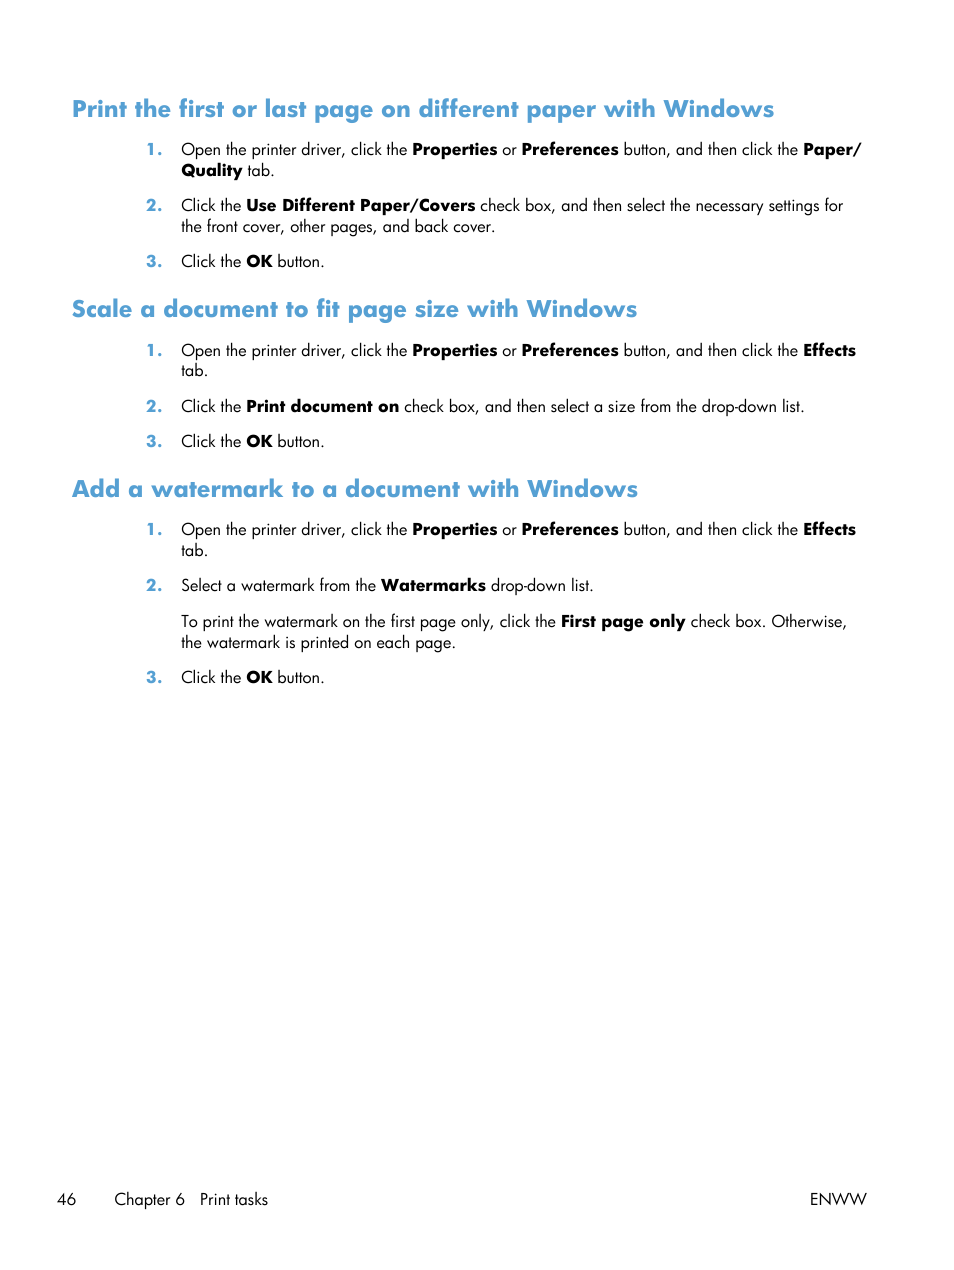 Add a watermark to a document with windows, Scale a document to fit page size with windows | HP Laserjet p1606dn User Manual | Page 58 / 152